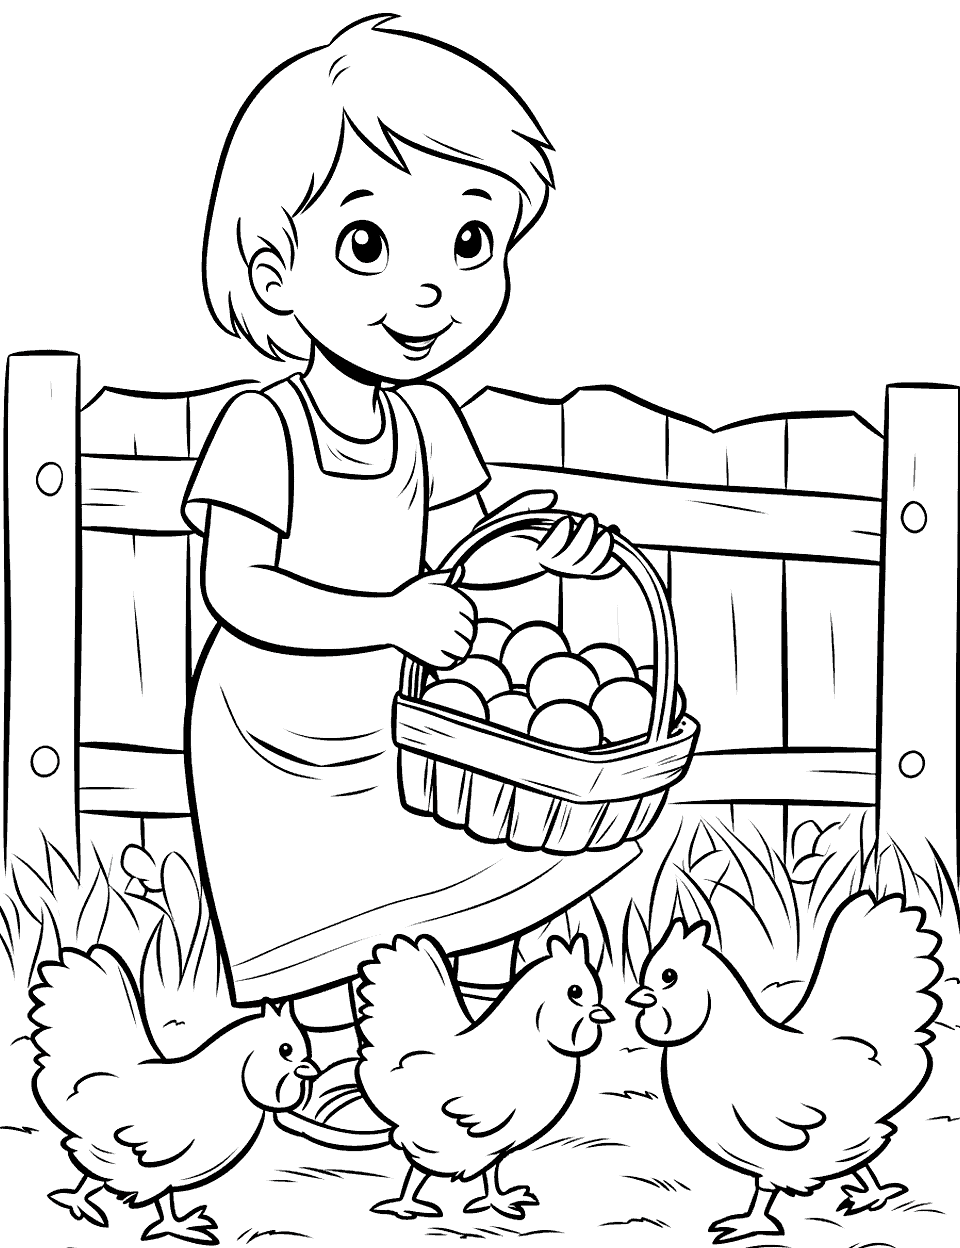 Gathering Eggs from Chickens Farm Coloring Page - A basket being filled with eggs from a chicken coop.